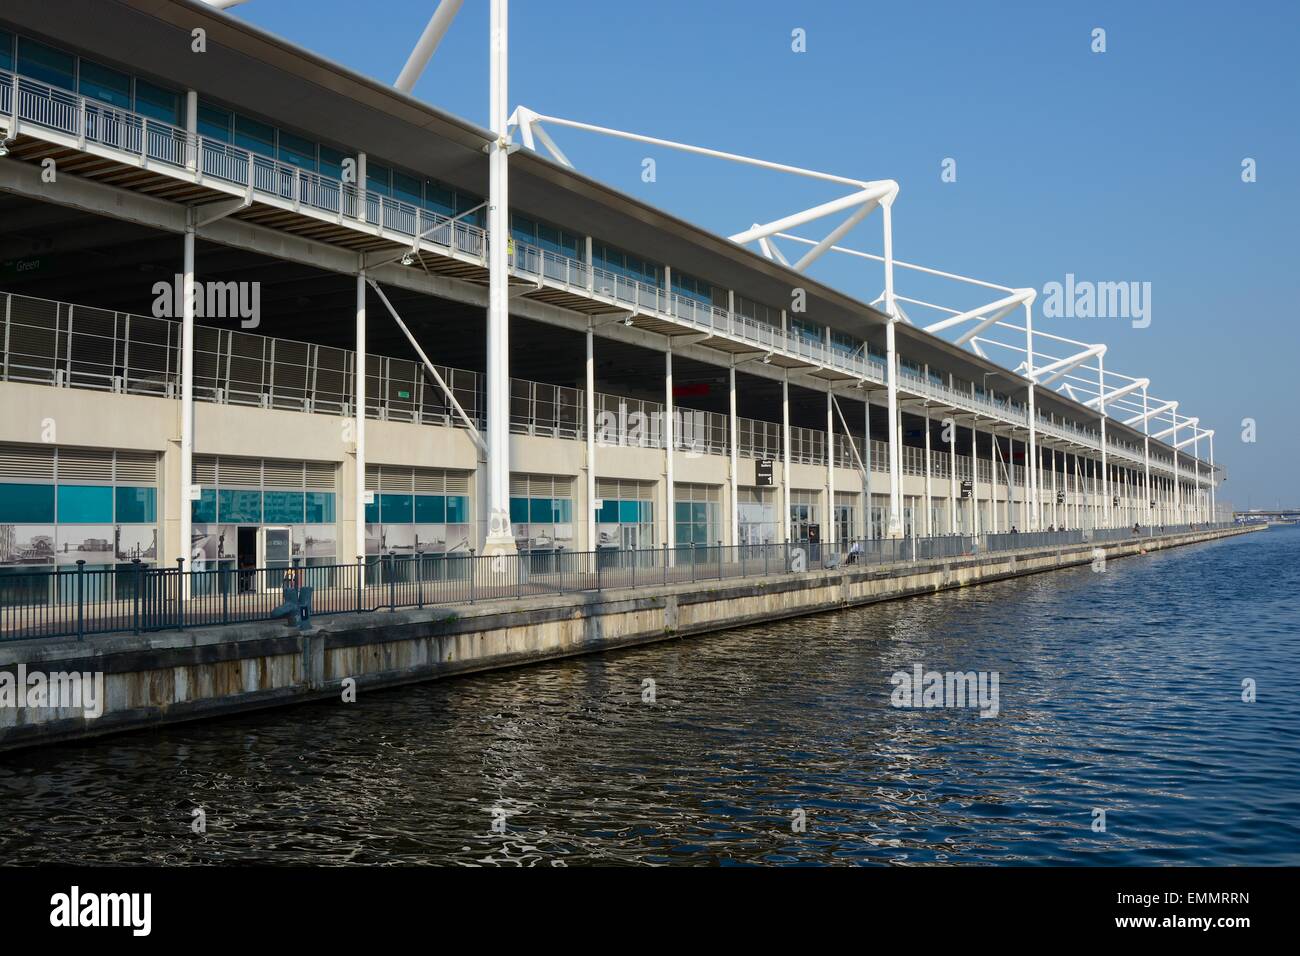 Der Excel-Conference and Exhibition Centre in Docklands, London, England. Mit Menschen. Stockfoto